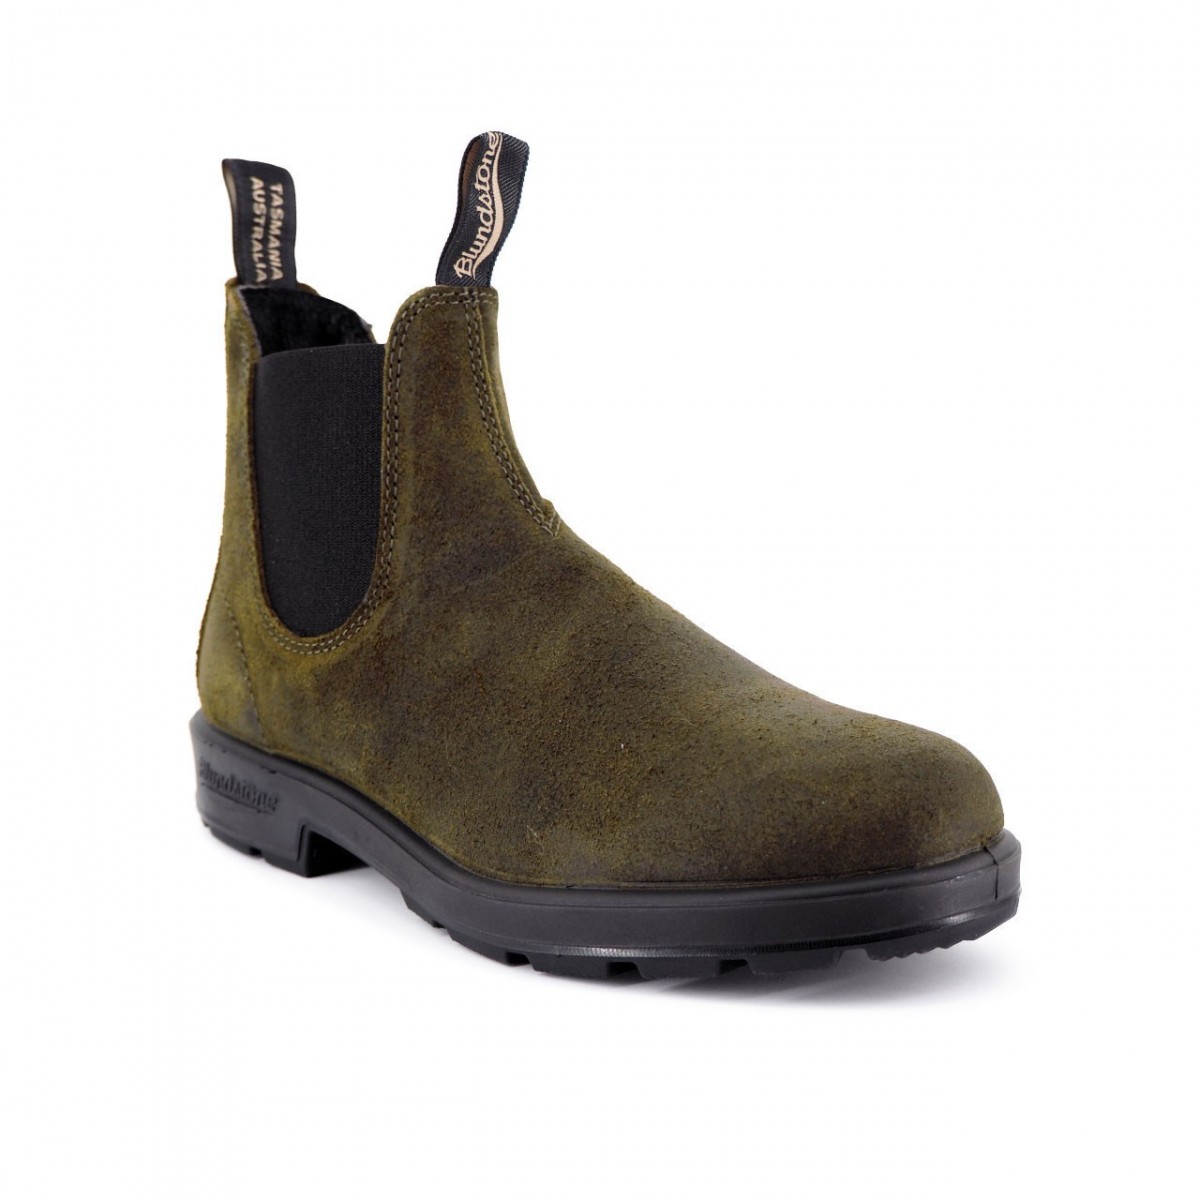 Blundstone | 1615 El Side Boot Suede, Green | BST_BCCAL0418 1615 888